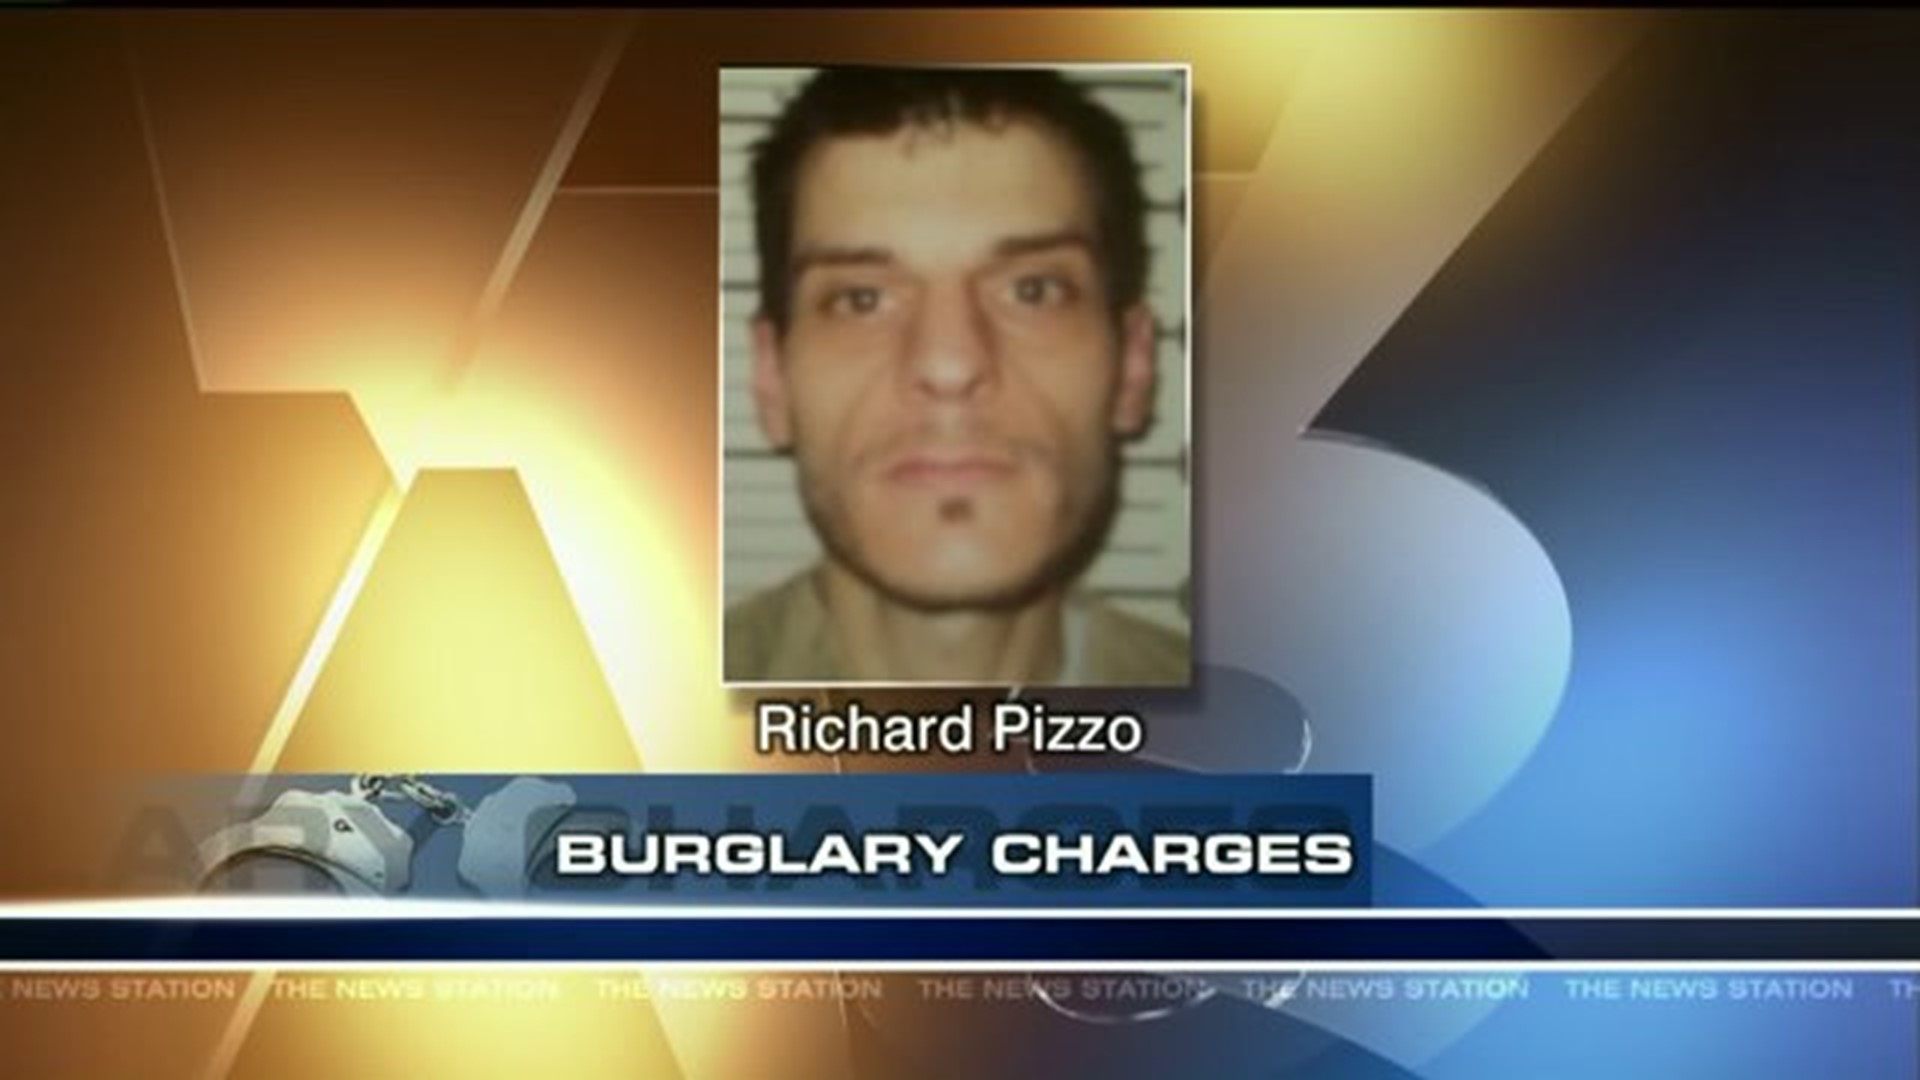 Man Accused of Stealing from Businesses in Schuylkill County